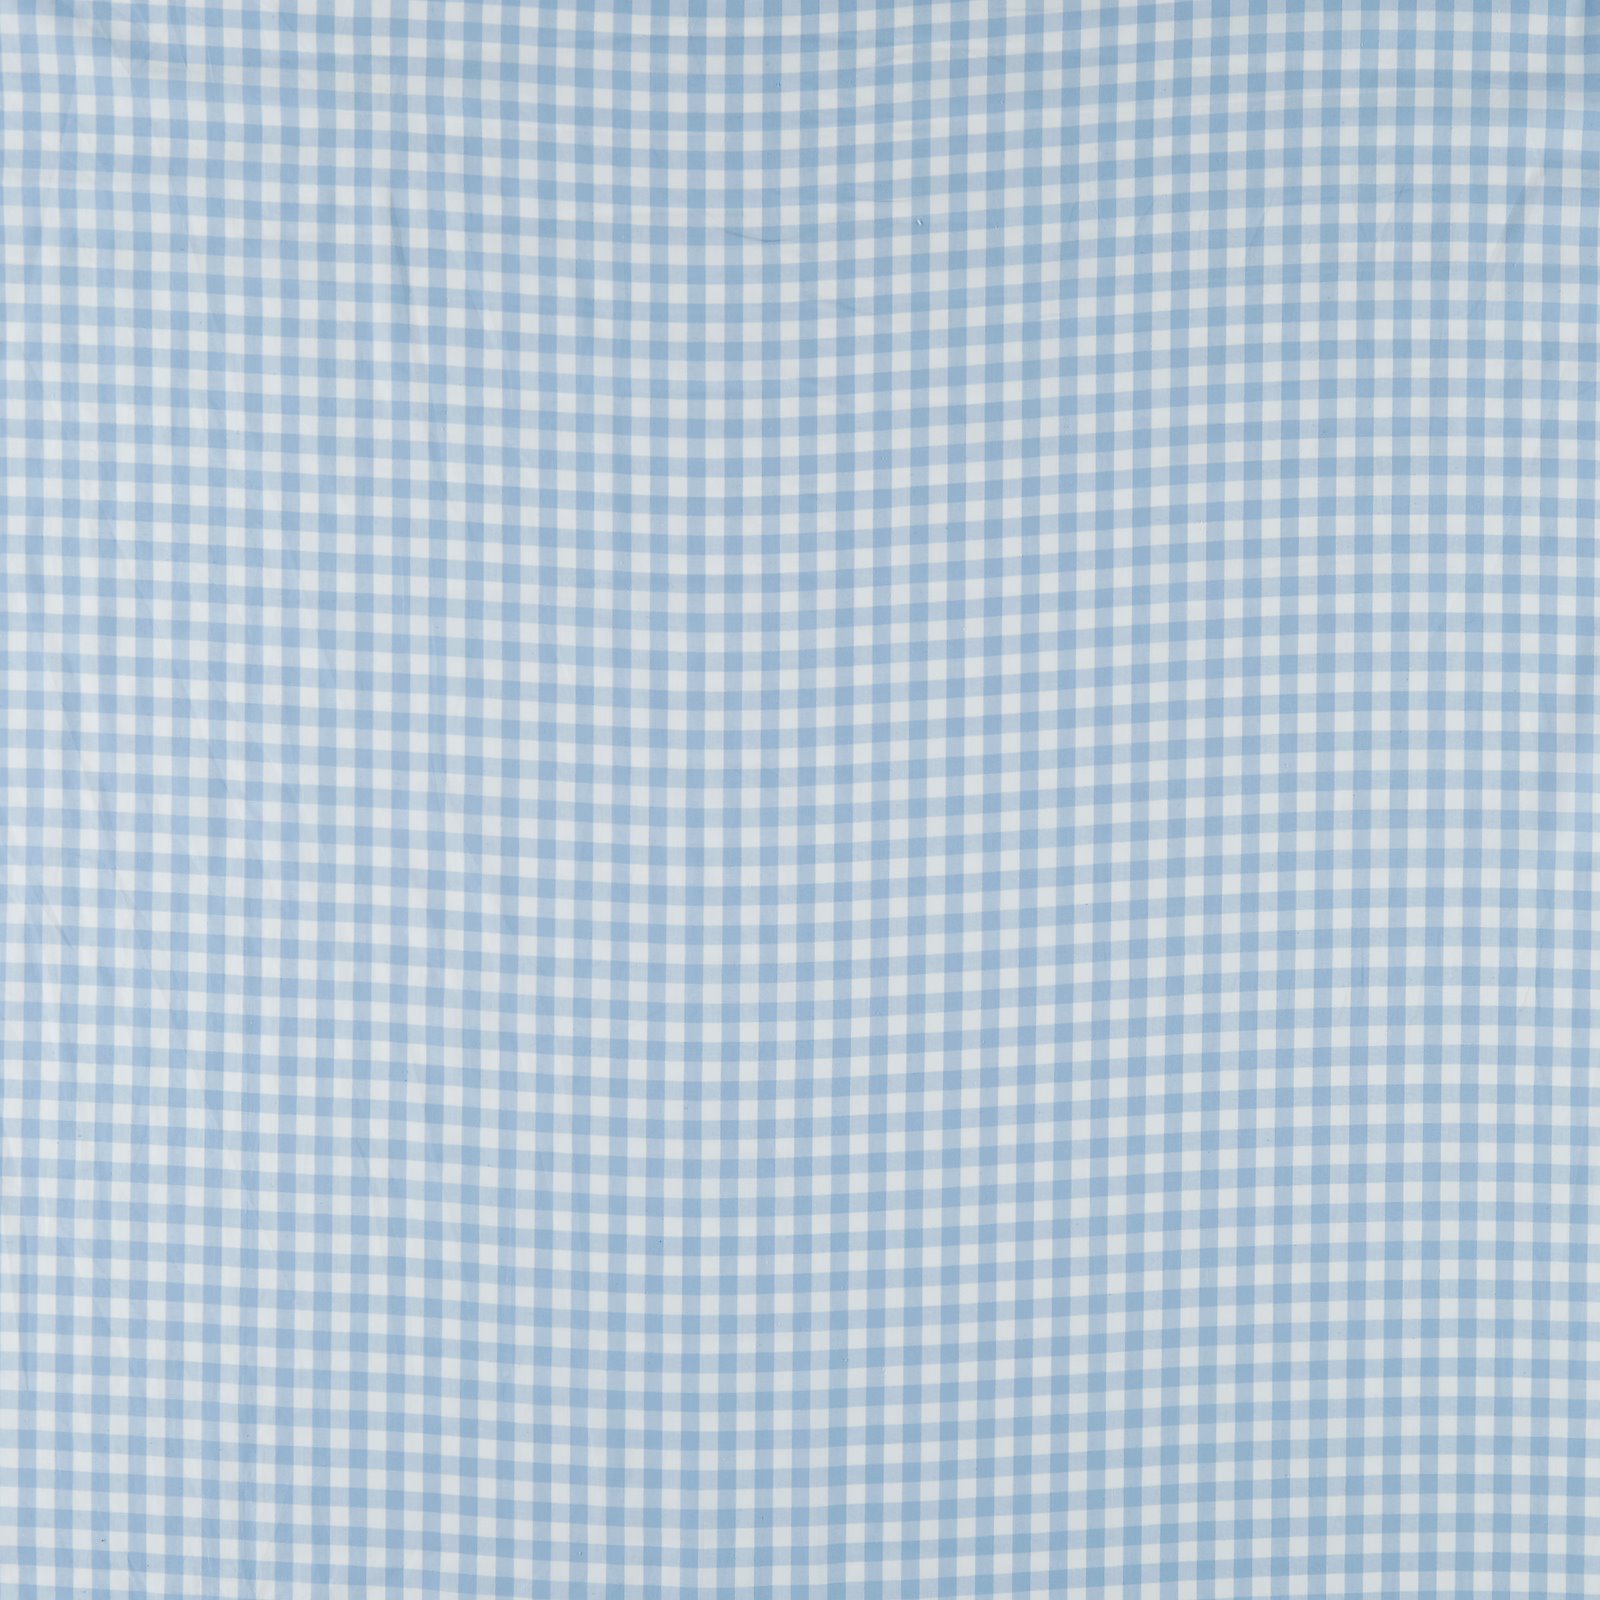 Cotton yarn dyed light blue/white check 780897_pack_sp